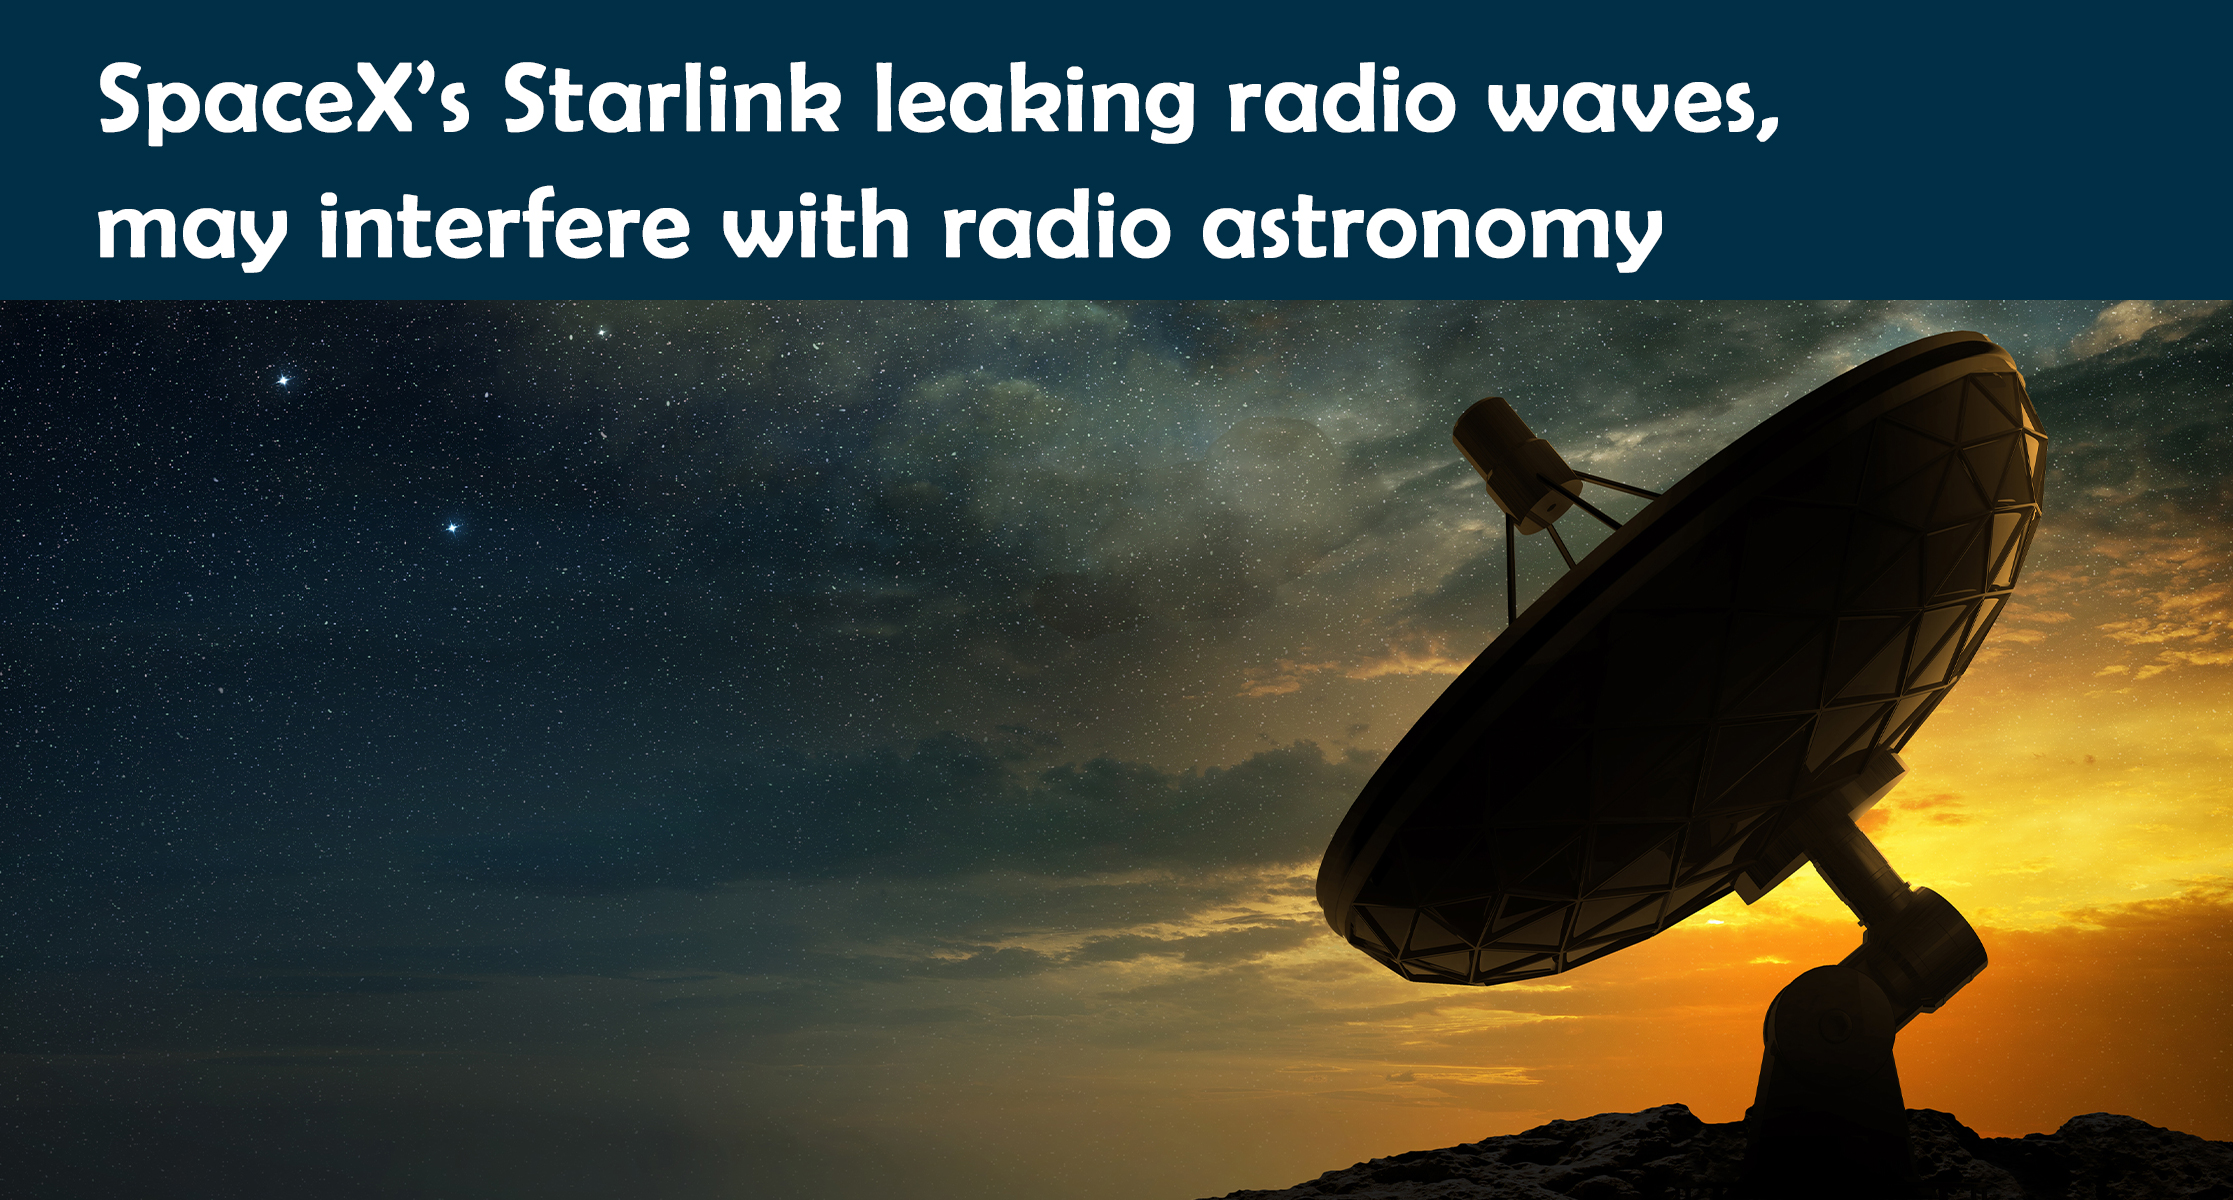 SpaceX’s Starlink leaking radio waves, may interfere with radio astronomy